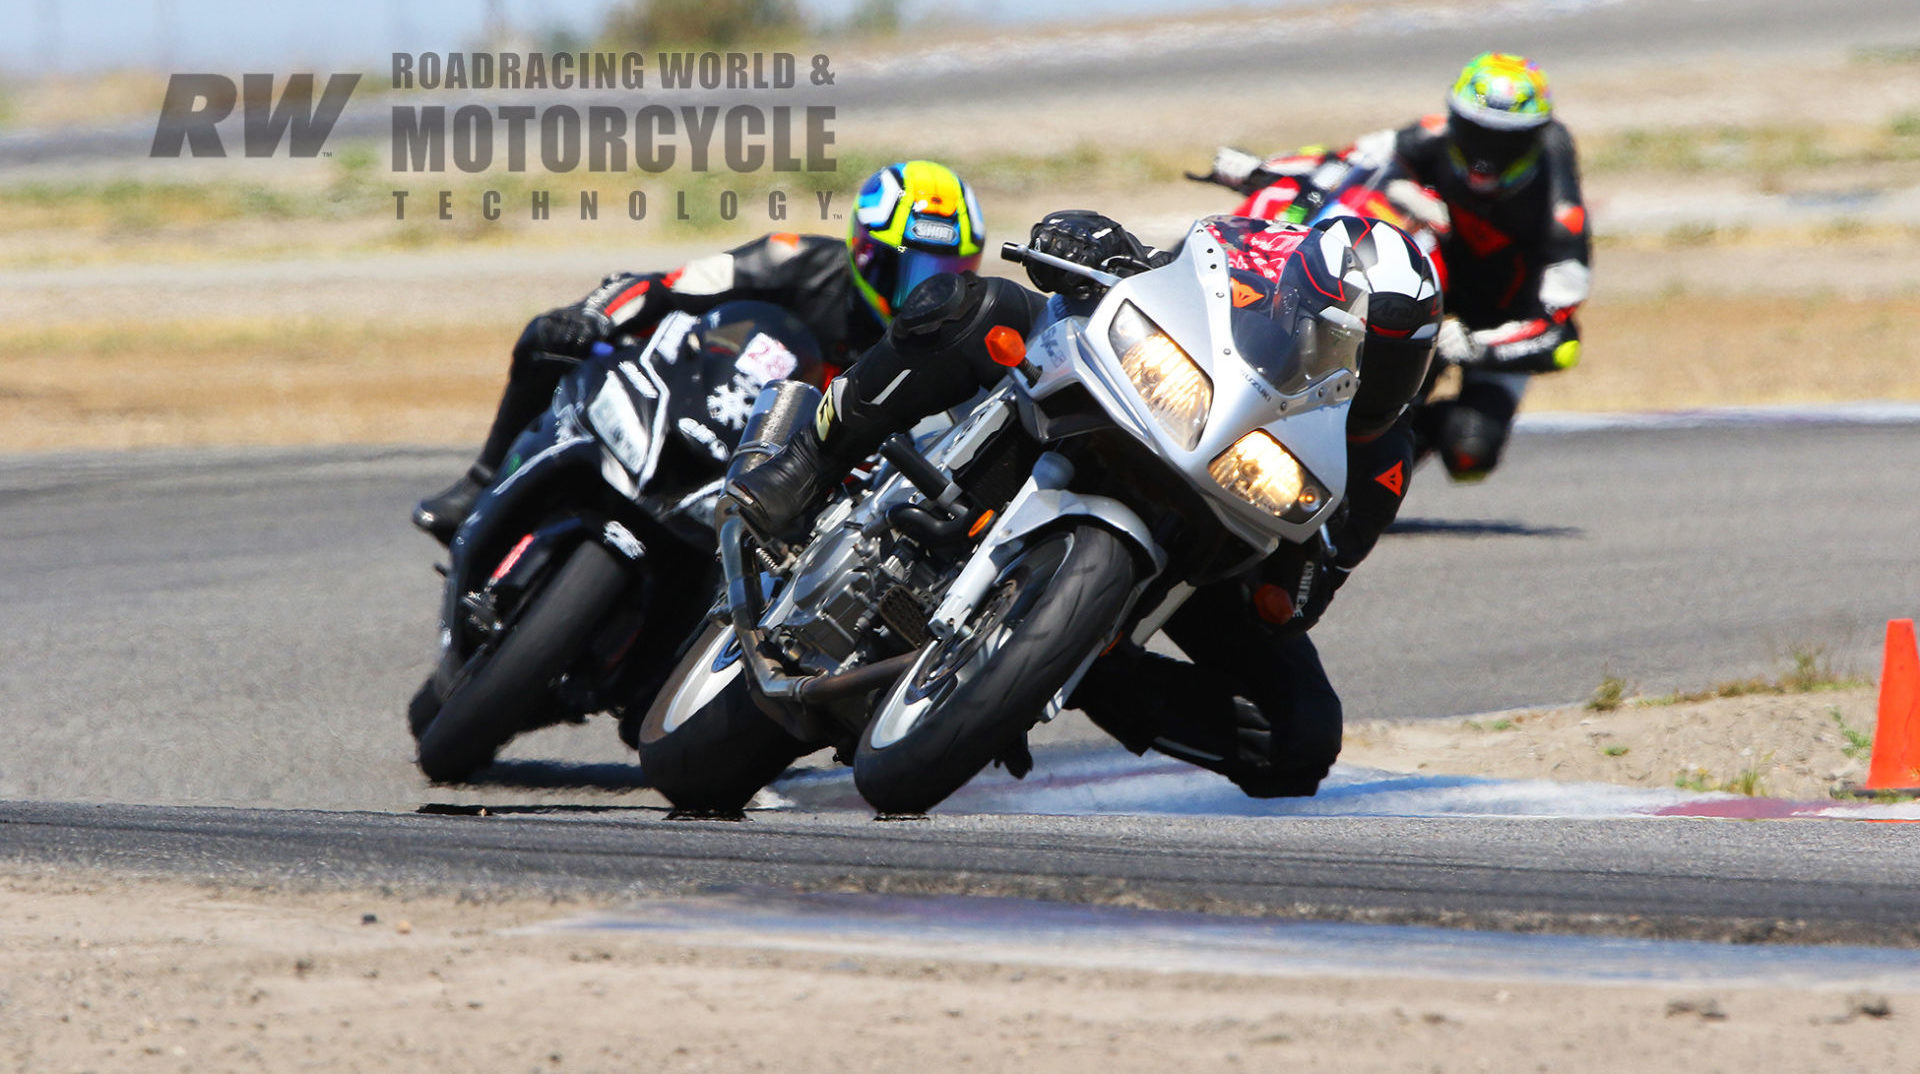 The author in action at Buttonwillow on his 2003 Suzuki SV650 after fitting a Traxxion Dynamics AR-25 Axxion Rod Damper Kit. The kit improved feel, compliance, and control. Photo by Caliphotography.com.